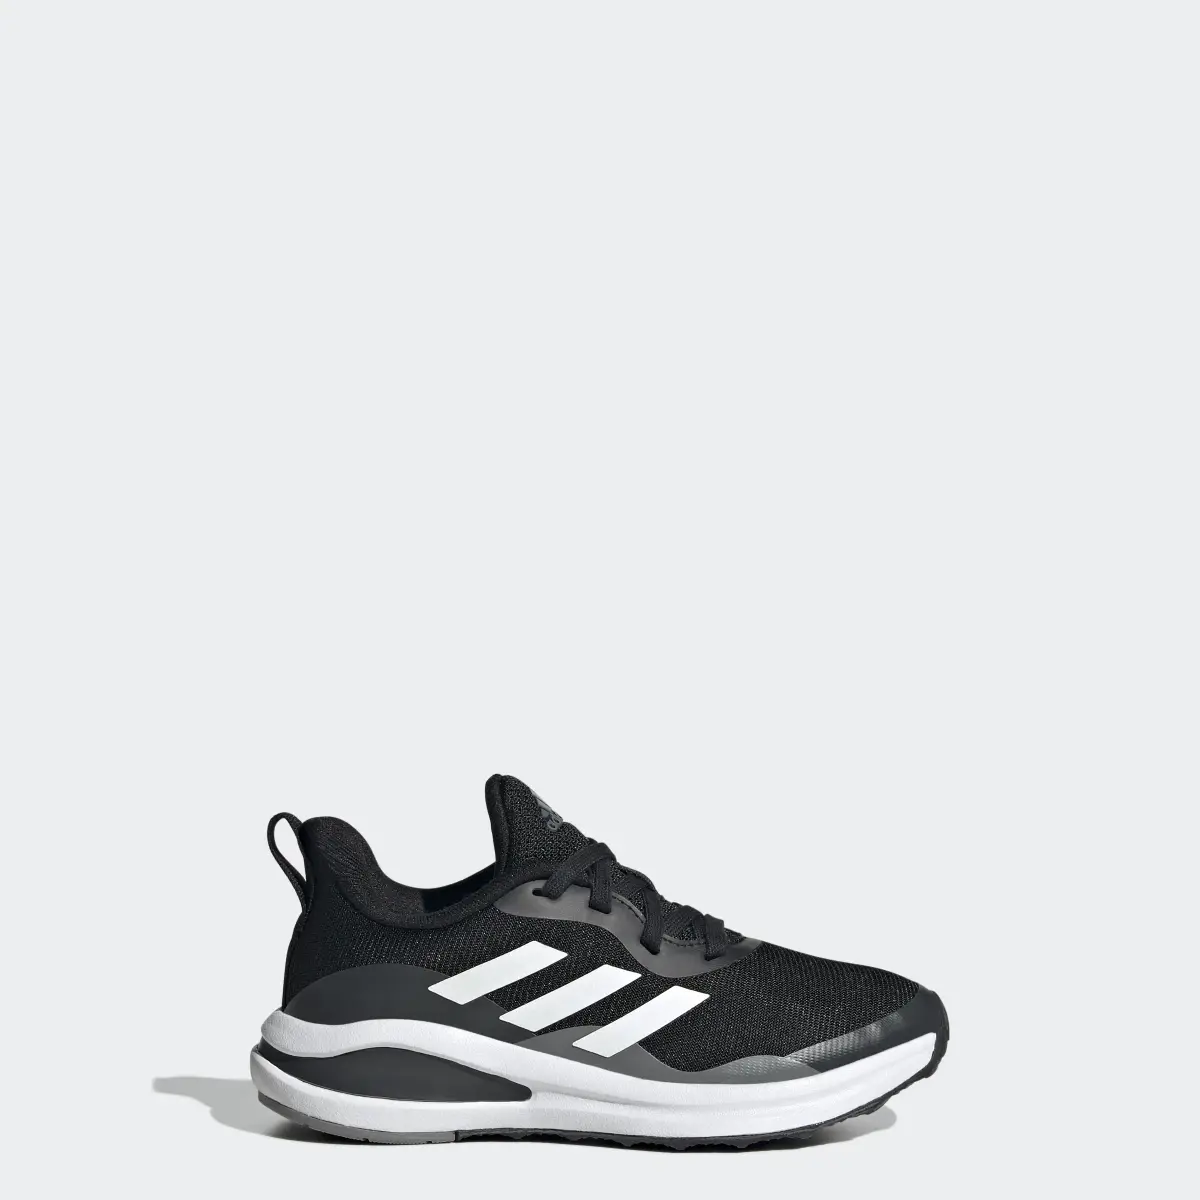 Adidas FortaRun Sport Running Lace Shoes. 1